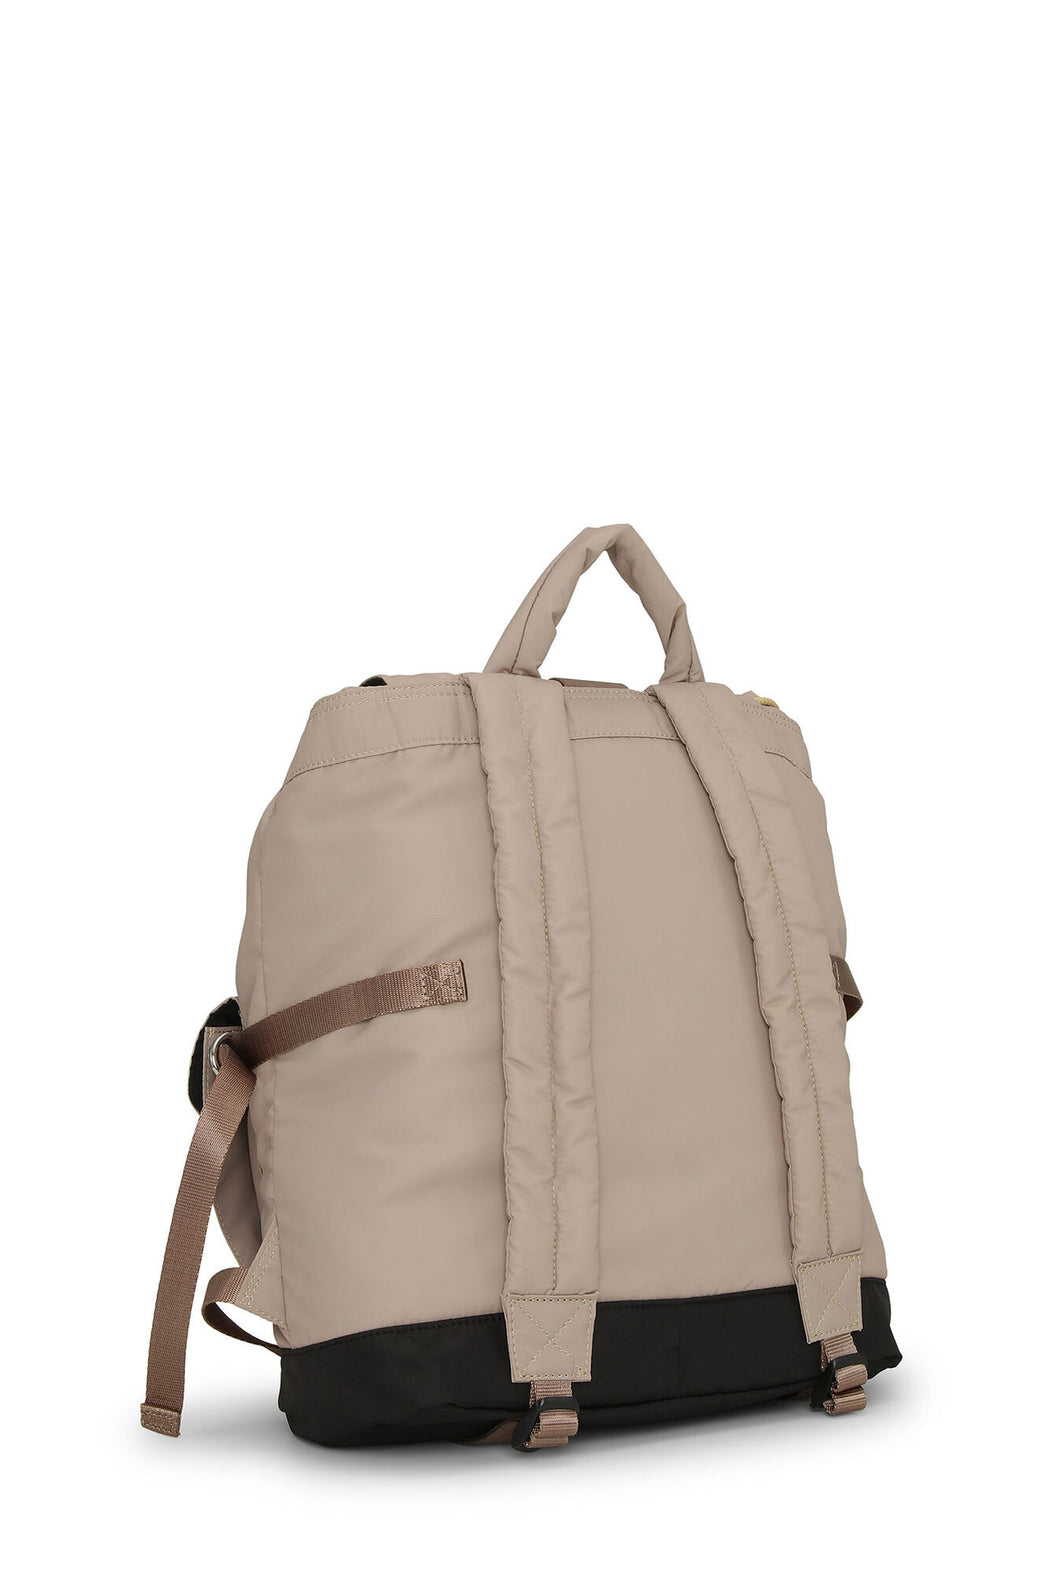 Ganni - Oyster Grey Recycled Tech Backpack